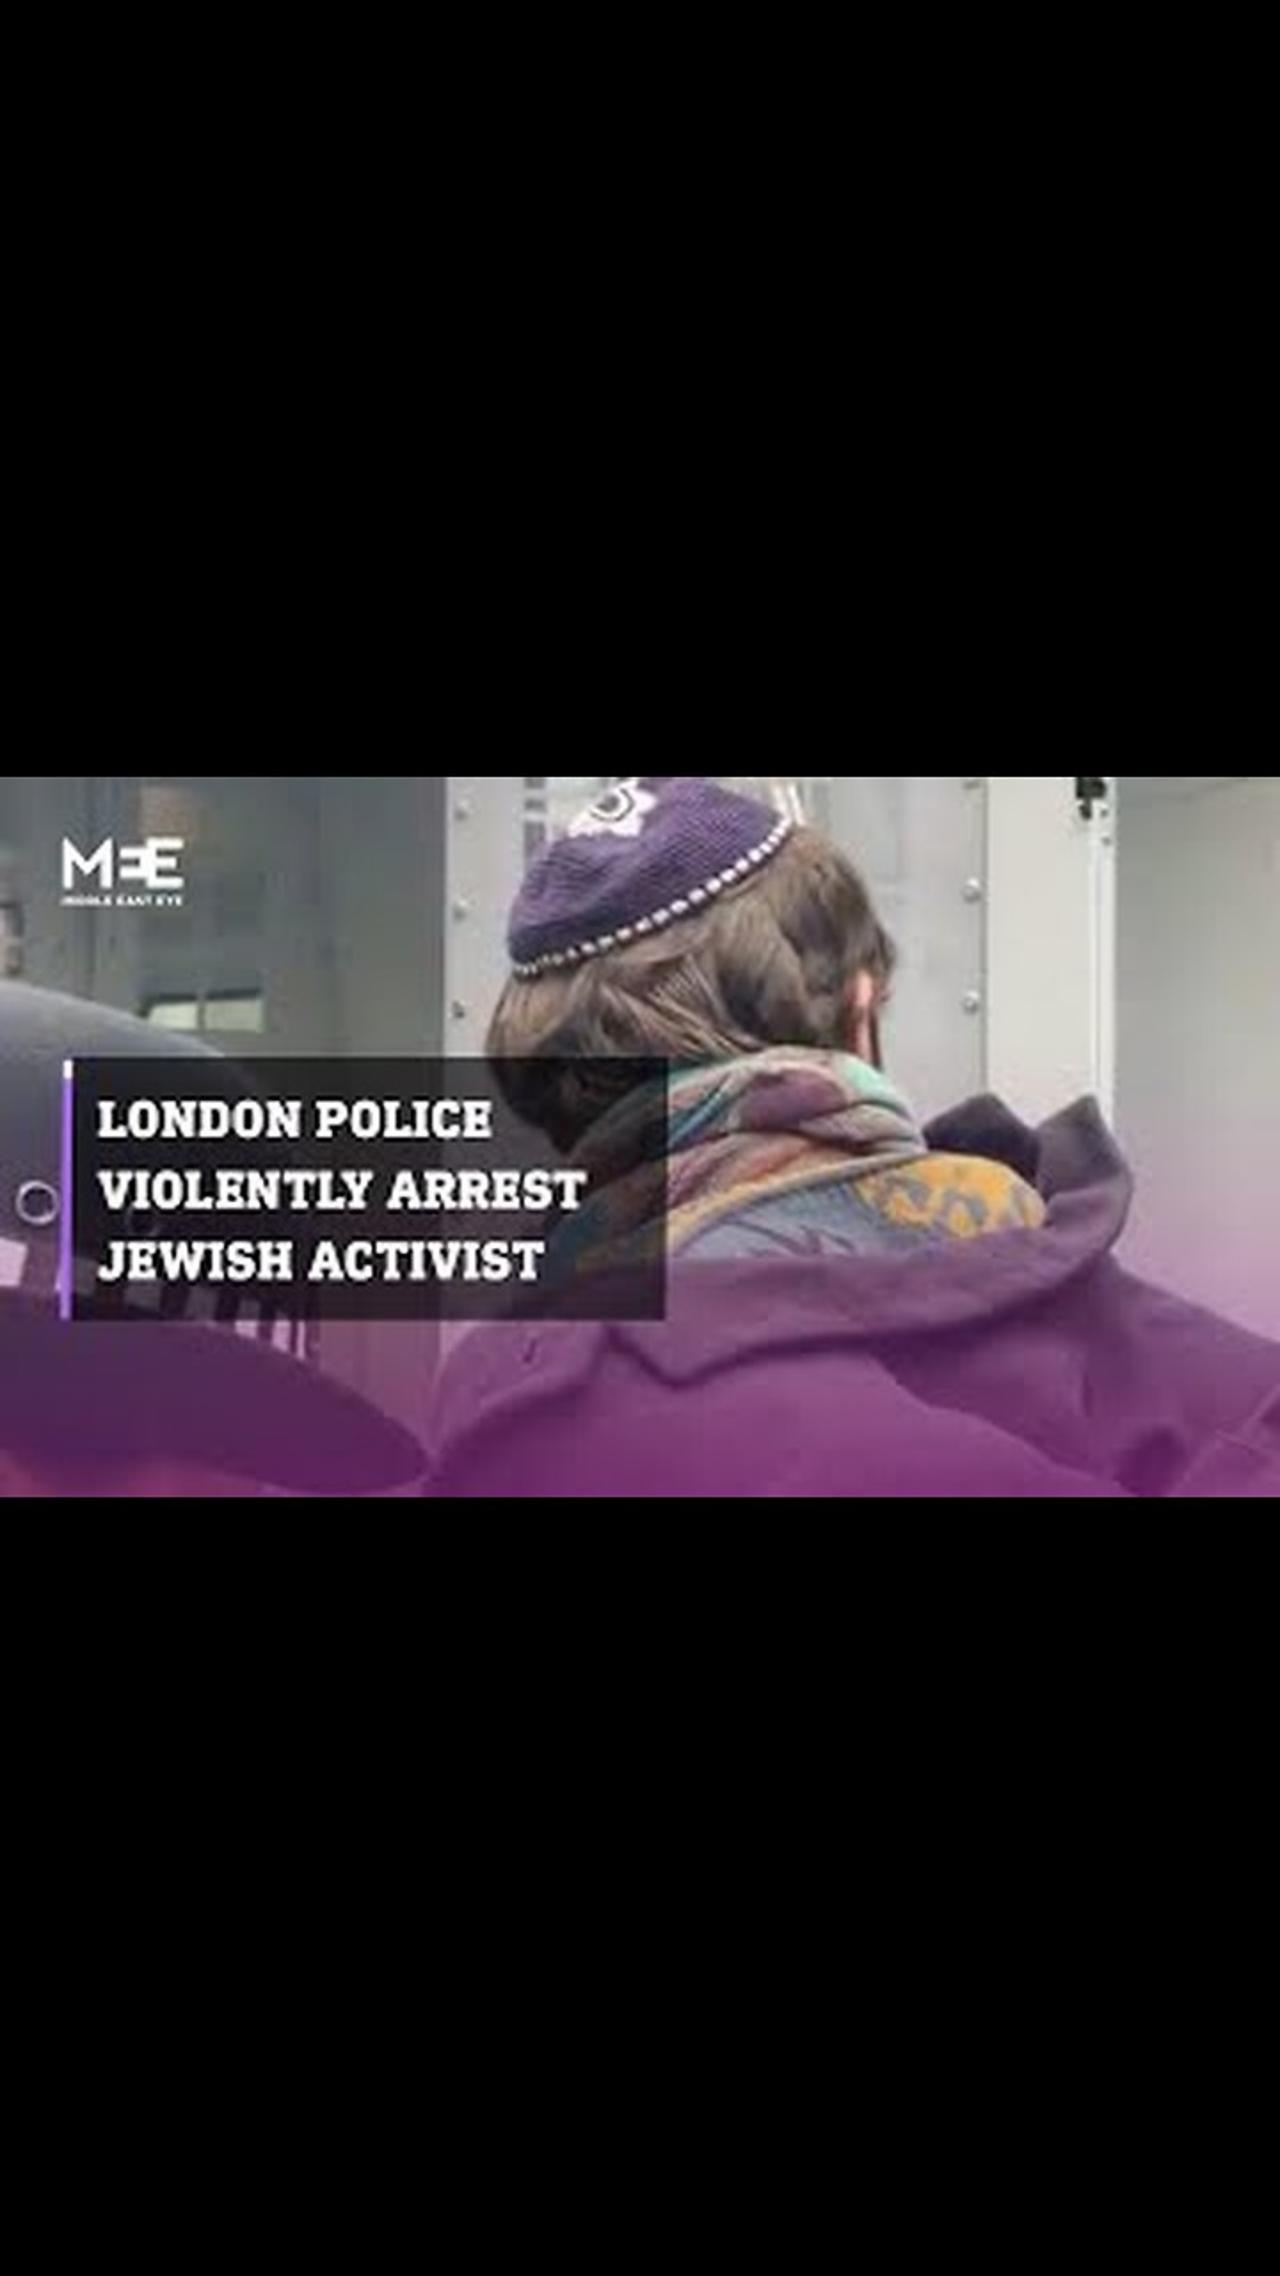 A Jewish activist was violently arrested while protesting an Israeli fundraiser in London